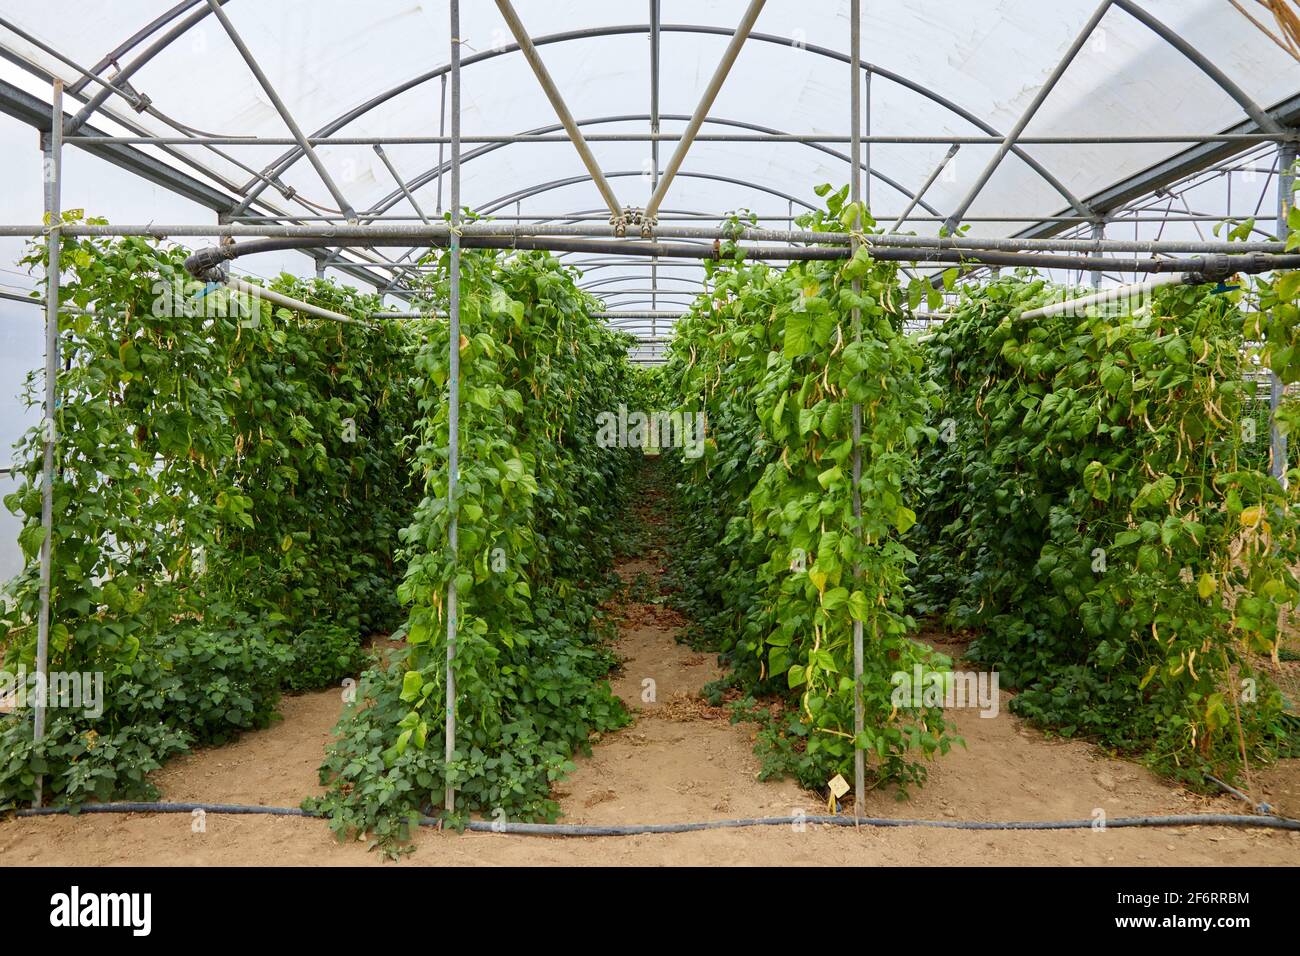 Greenhouse pepper cultivation, Institute for Agricultural Research and Development and the Natural Environment, Basque Country, Spain, Europe. Stock Photo